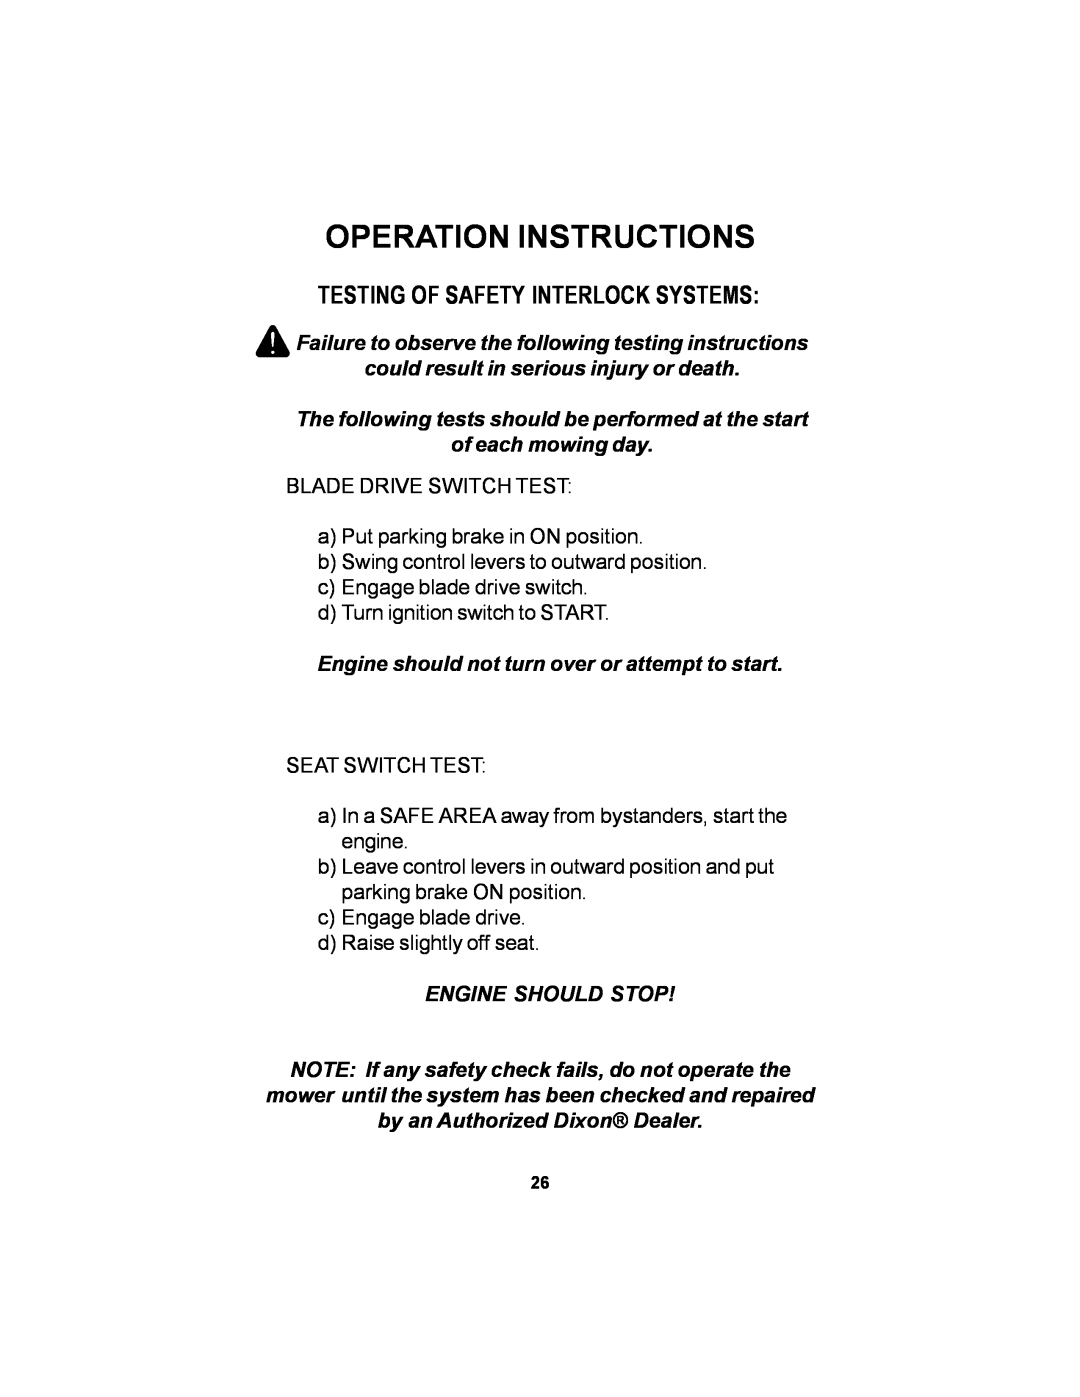 Dixon 11249-106 manual Operation Instructions, Testing Of Safety Interlock Systems, of each mowing day 